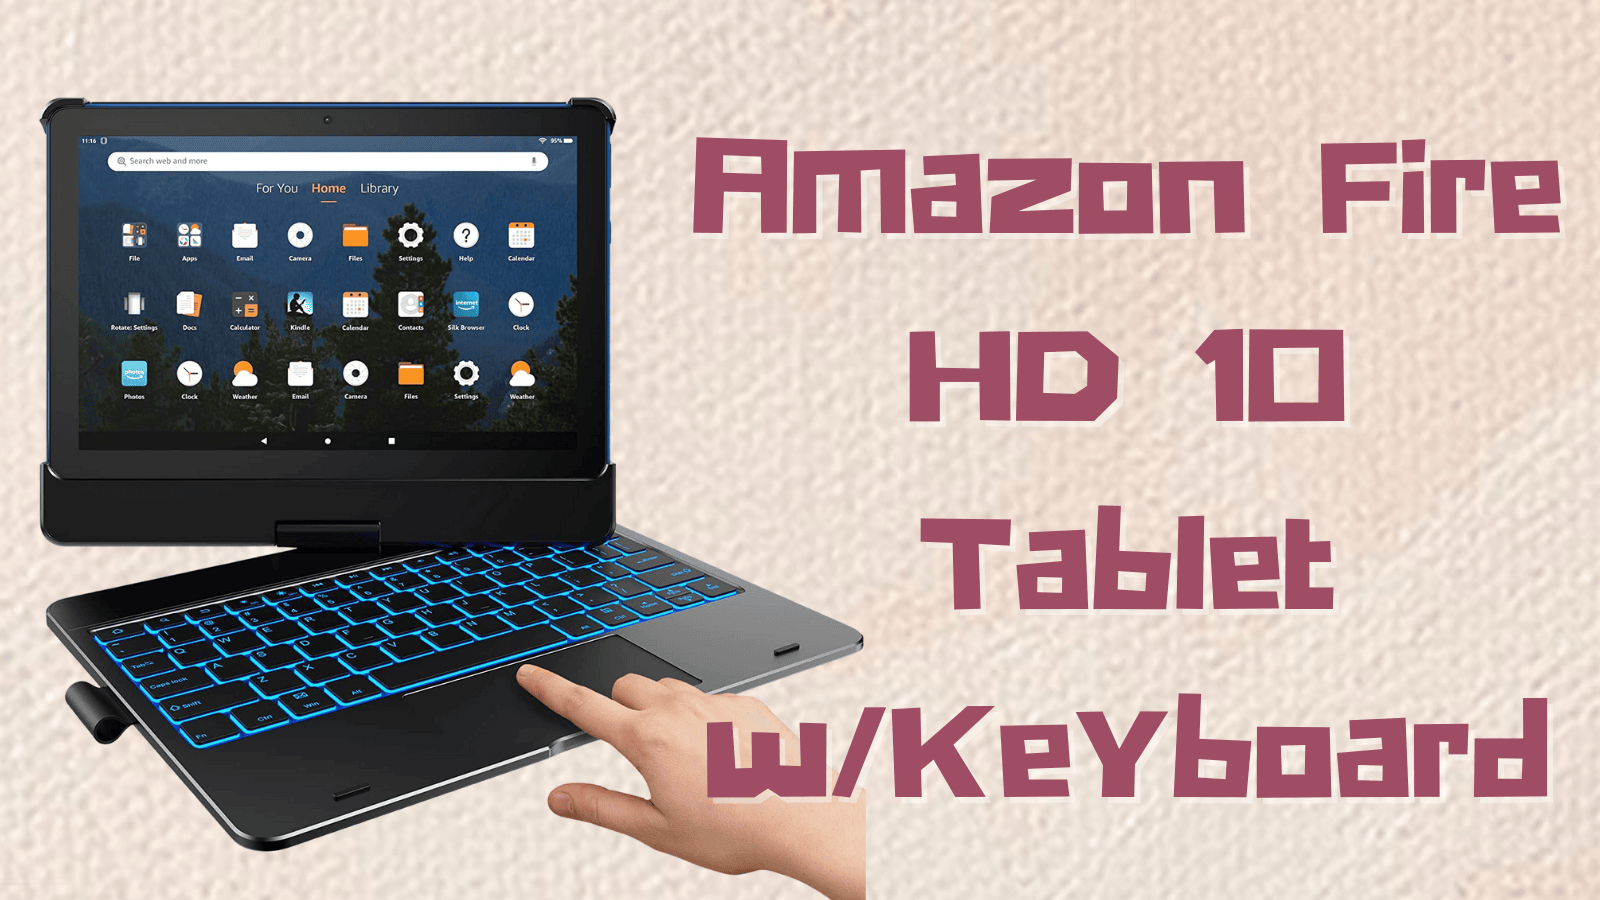 Amazon Fire HD 10 Tablet with keyboard